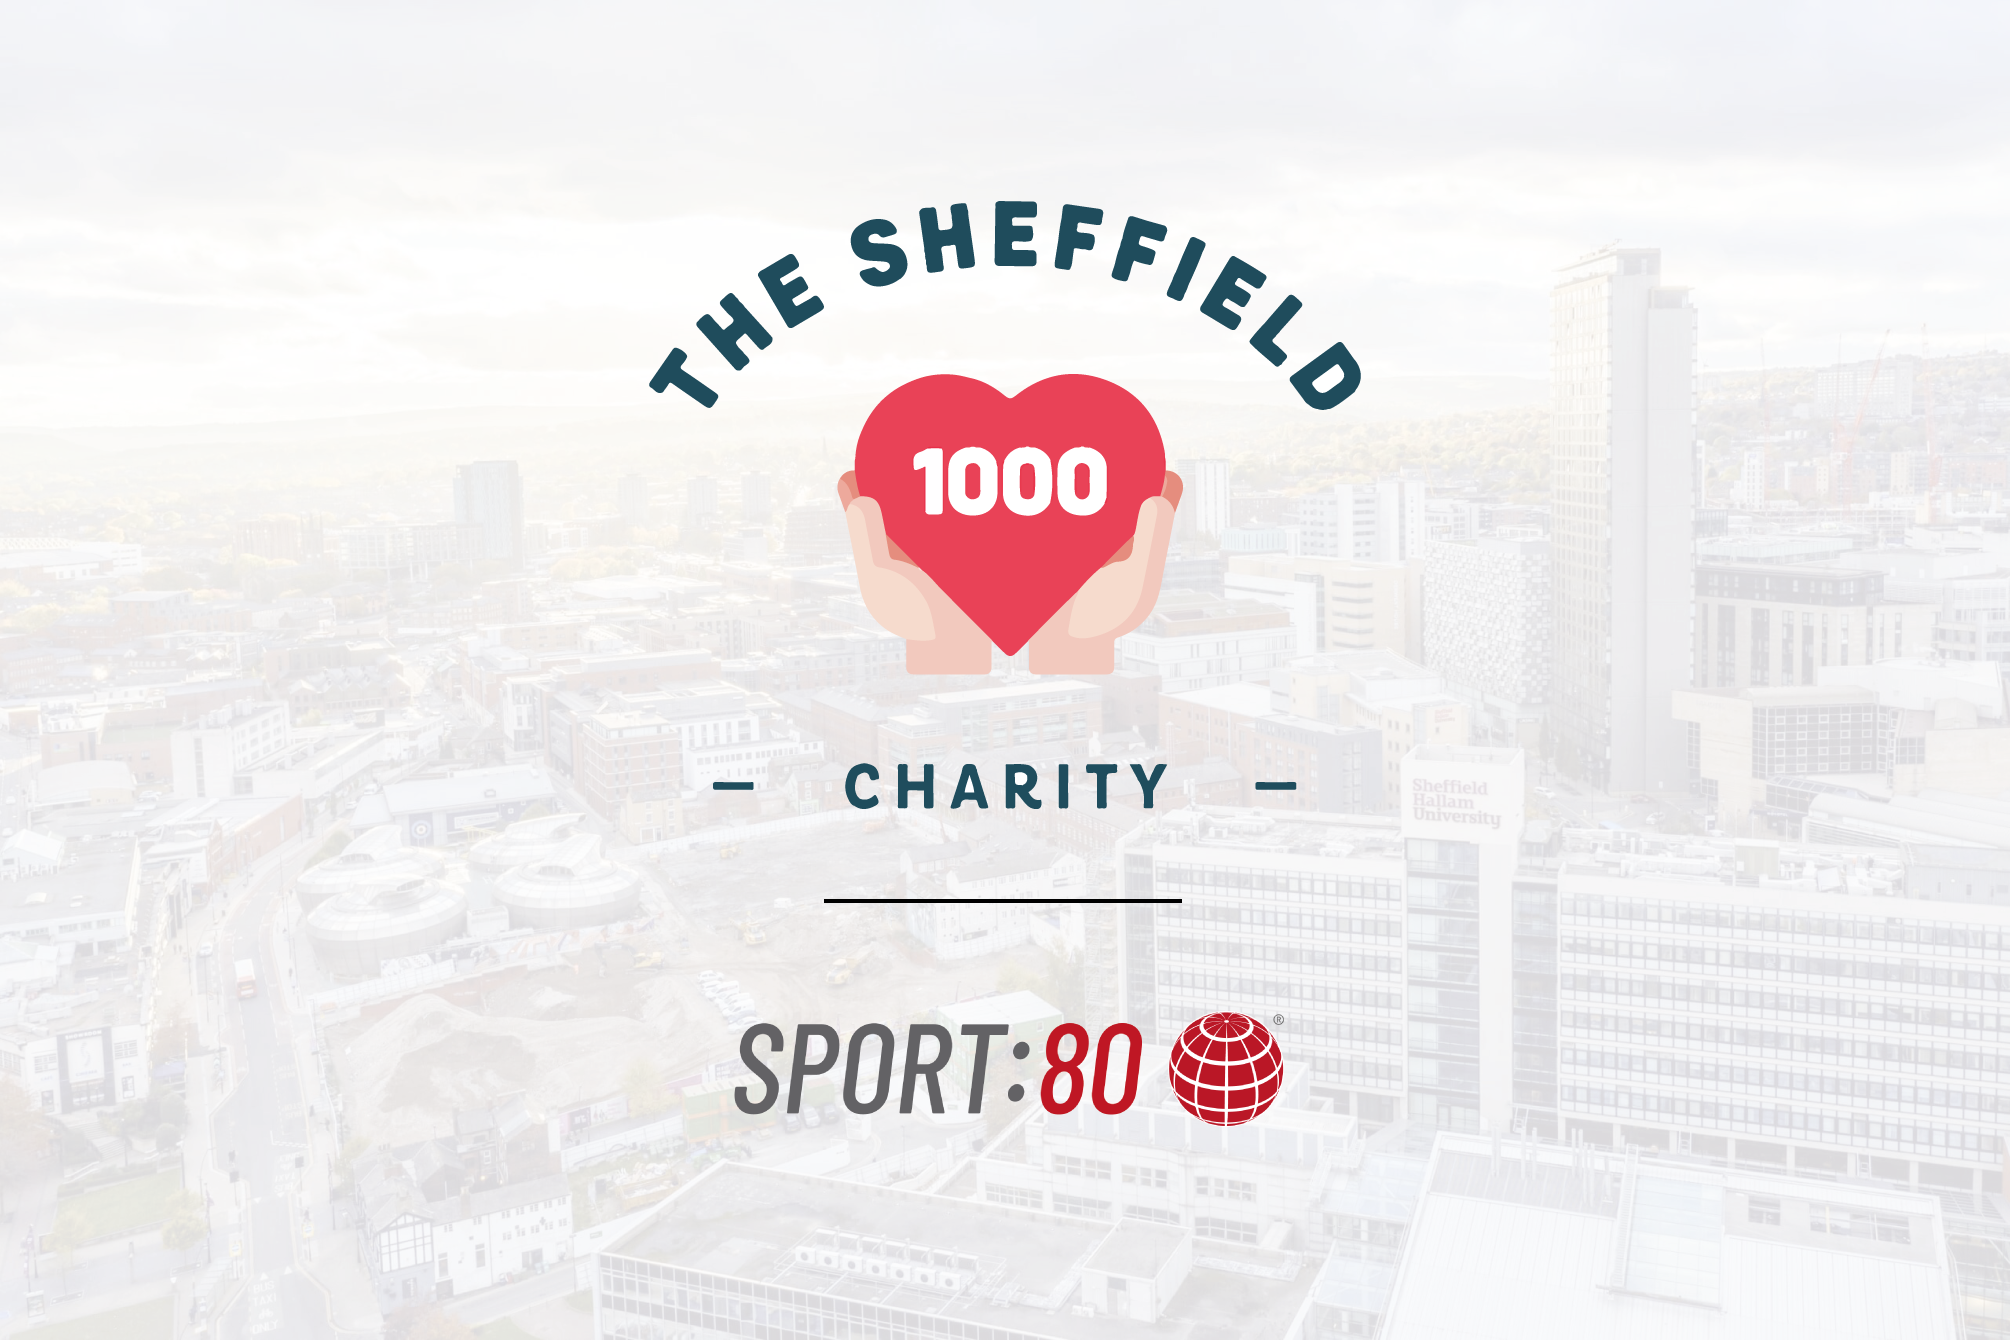 Helping the Sheffield 1000 to support local charities, good causes and organisations